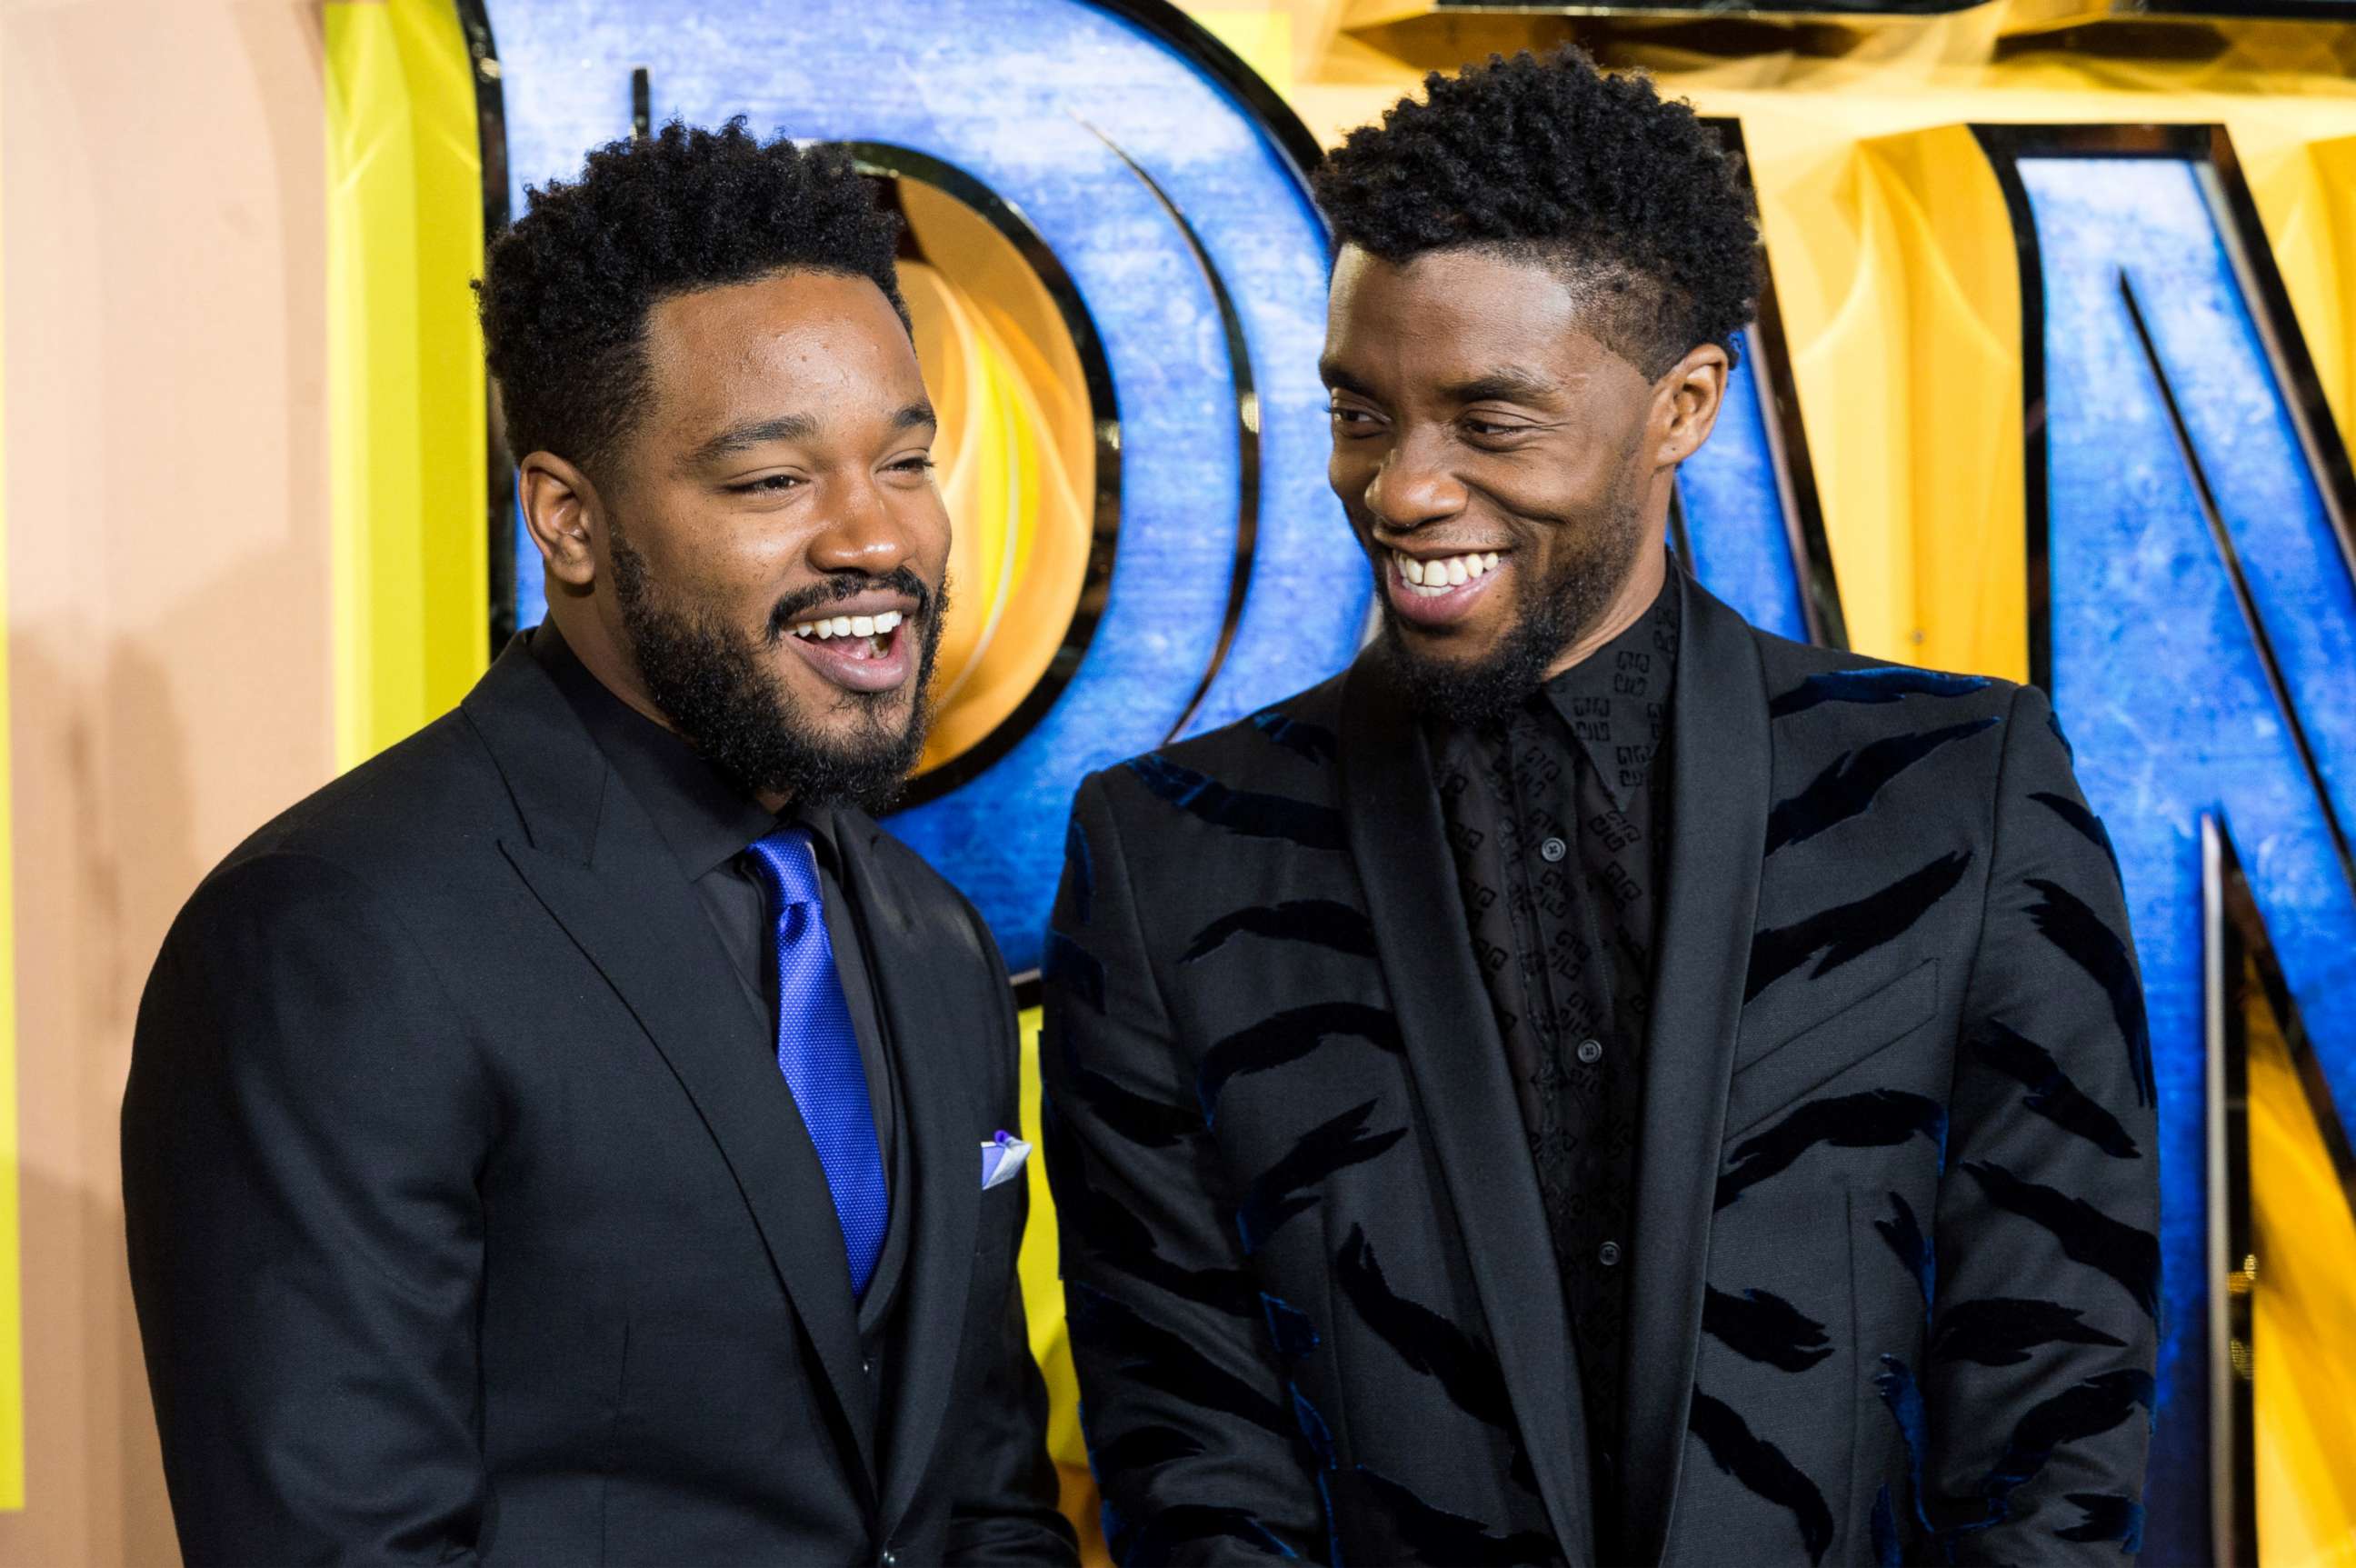 PHOTO: Ryan Coogler and Chadwick Boseman arrive for the European film premiere of "Black Panther" in London, Feb. 8, 2018.